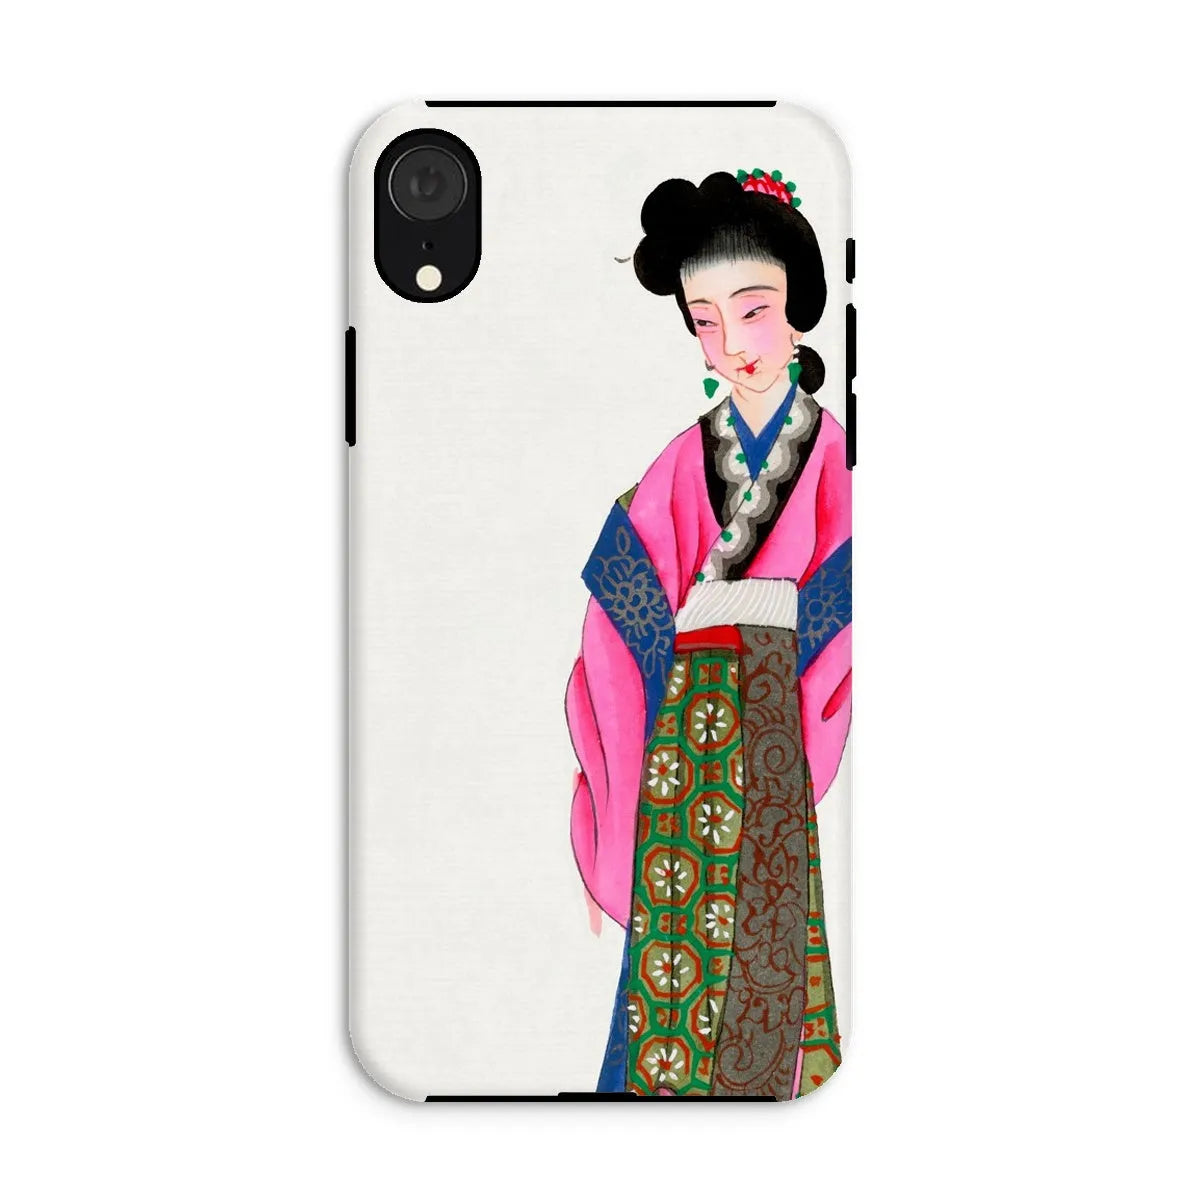 Noblewoman - Chinese Aesthetic Manchu Art Phone Case - Iphone Xr / Matte - Mobile Phone Cases - Aesthetic Art